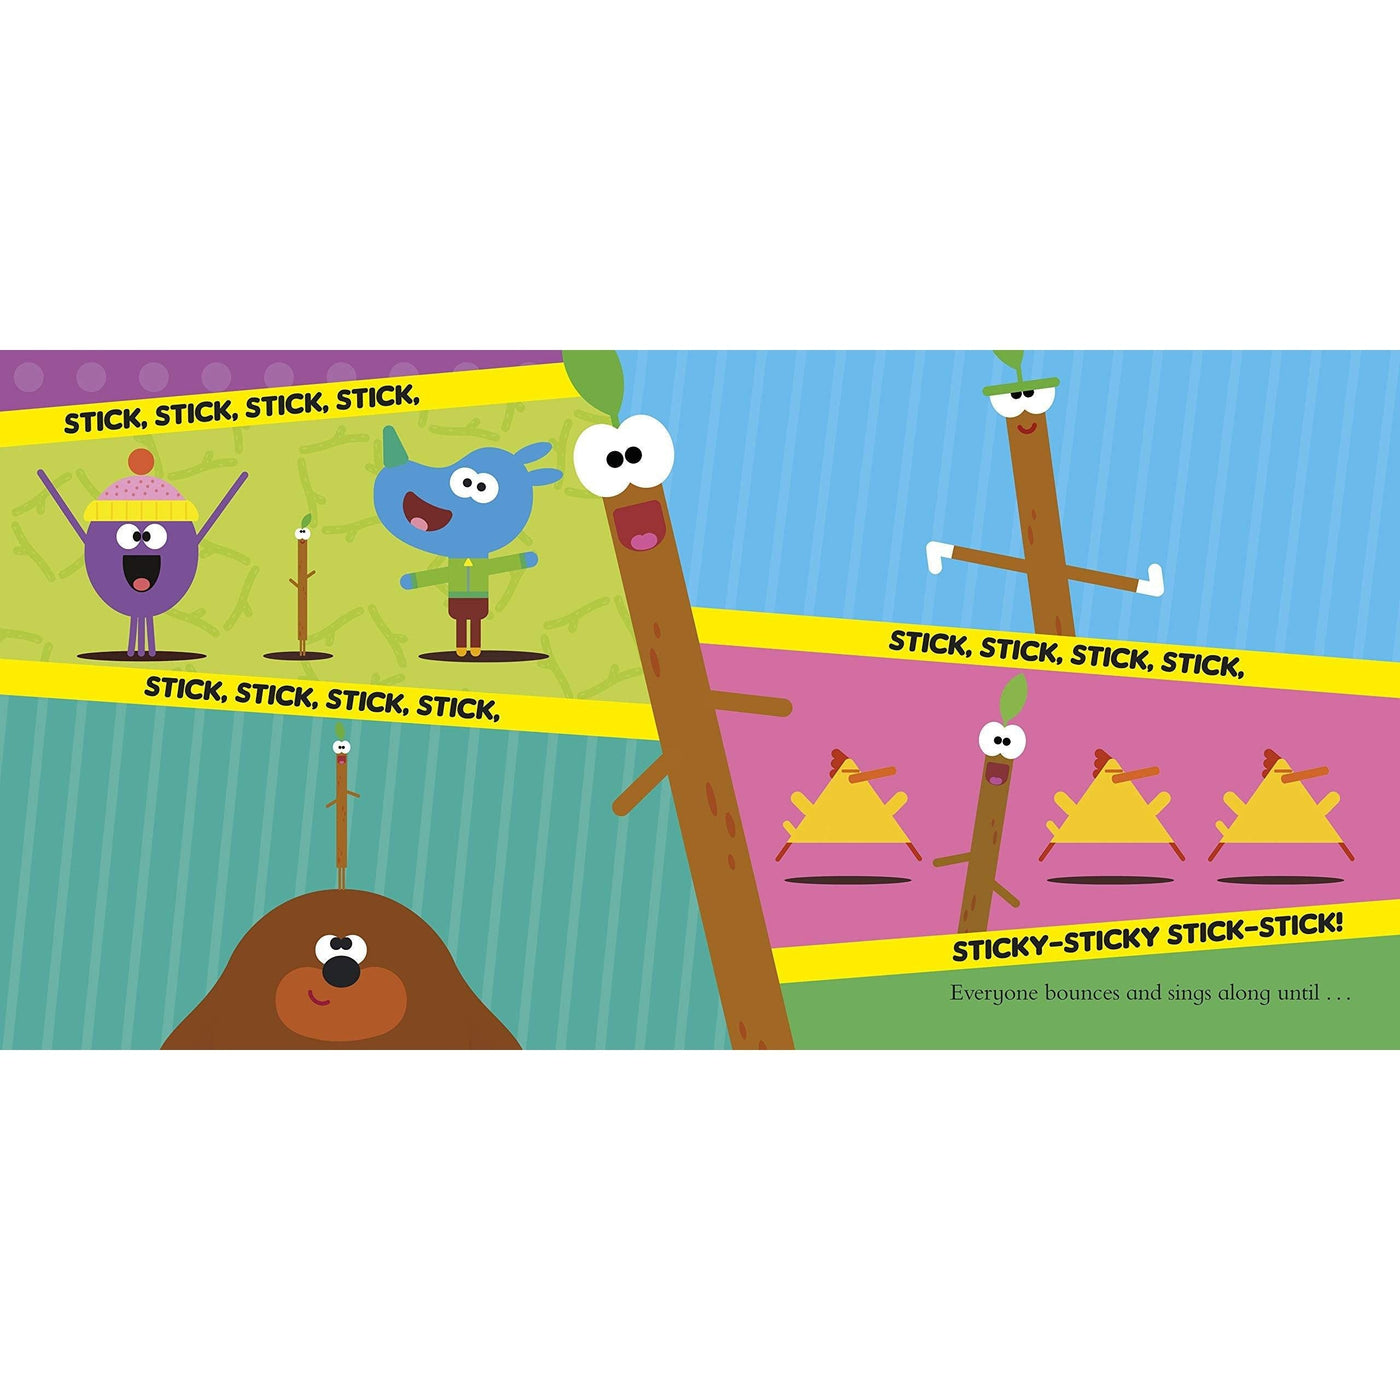 Hey Duggee: Duggee and the Stick Badge